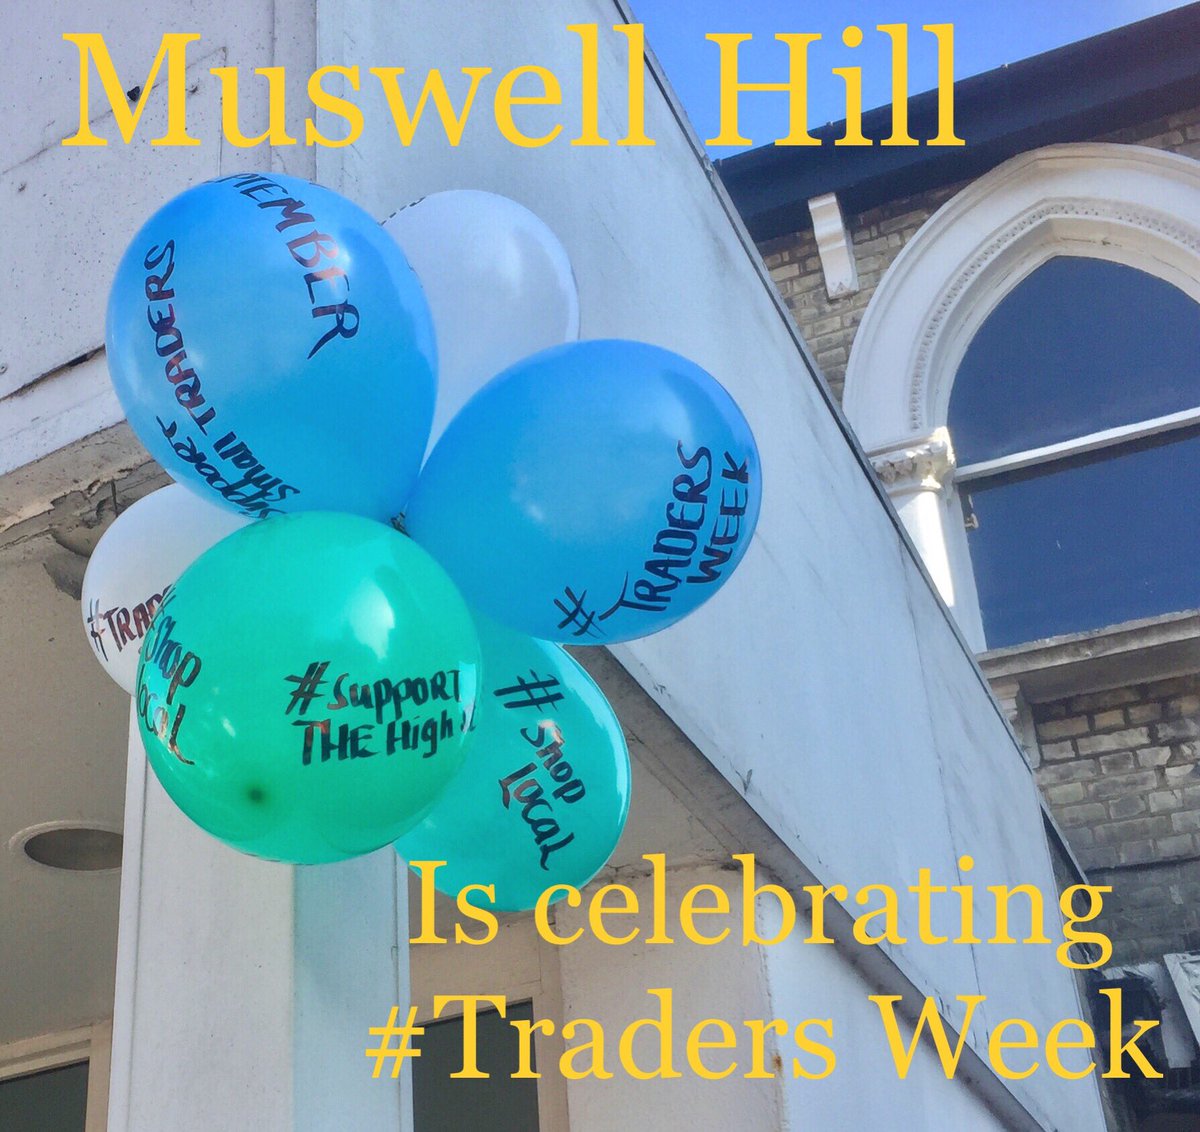 ITS TRADERS WEEK 
MUSWELL HILL 🎈🎈🎈
21st-28th September 
#Weneedyoursupport 
Did you know?
Local shop closures have hit record levels so we need your support to continue delivering goods & services✨ #saveyourhighstreet 
#saveourhighstreet #supportindiebusiness 
#muswellhill